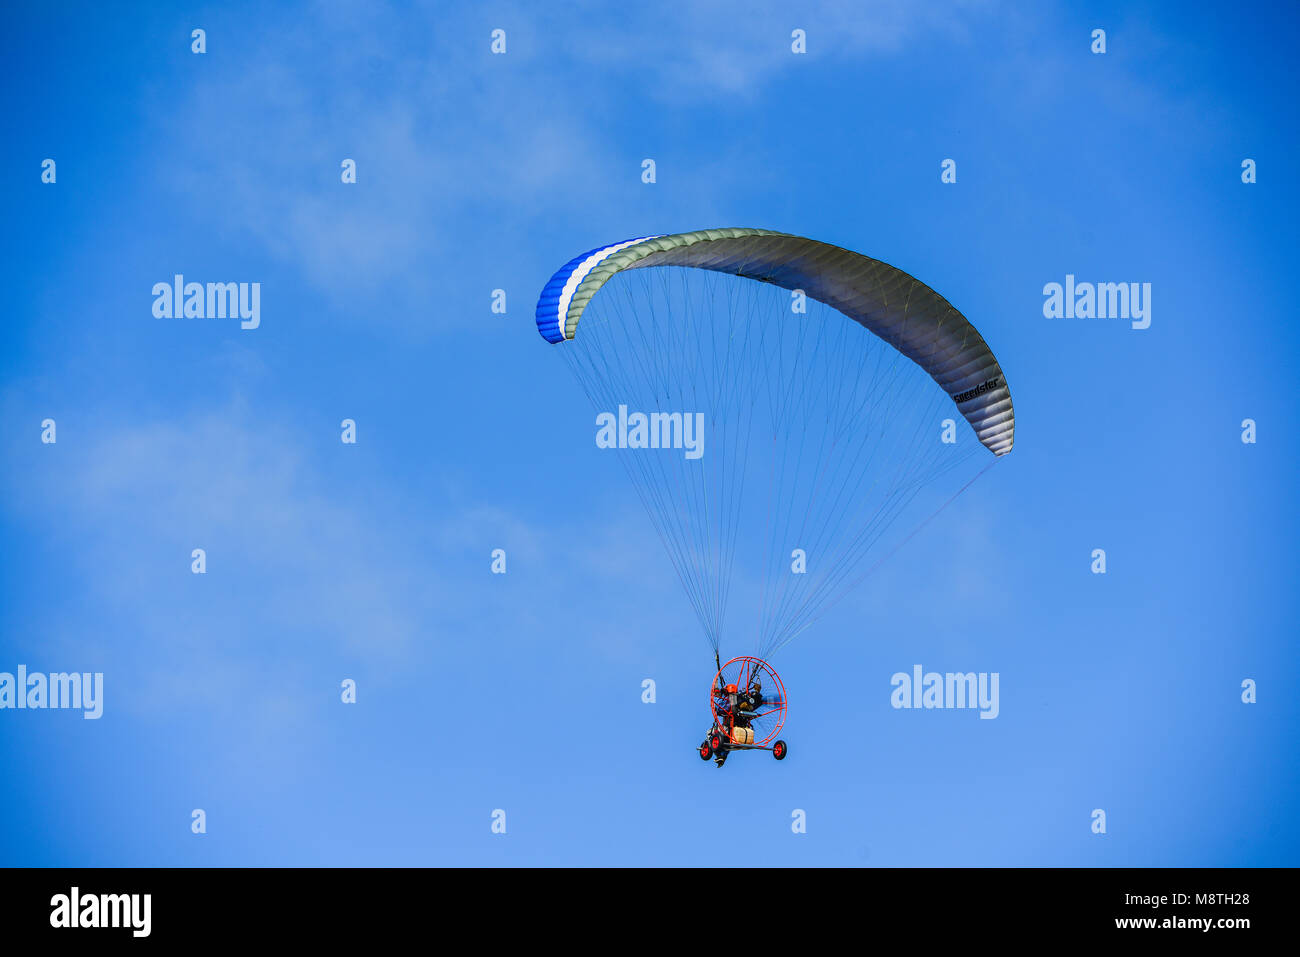 Un-identified man flying with glider in the clear sky day Stock Photo